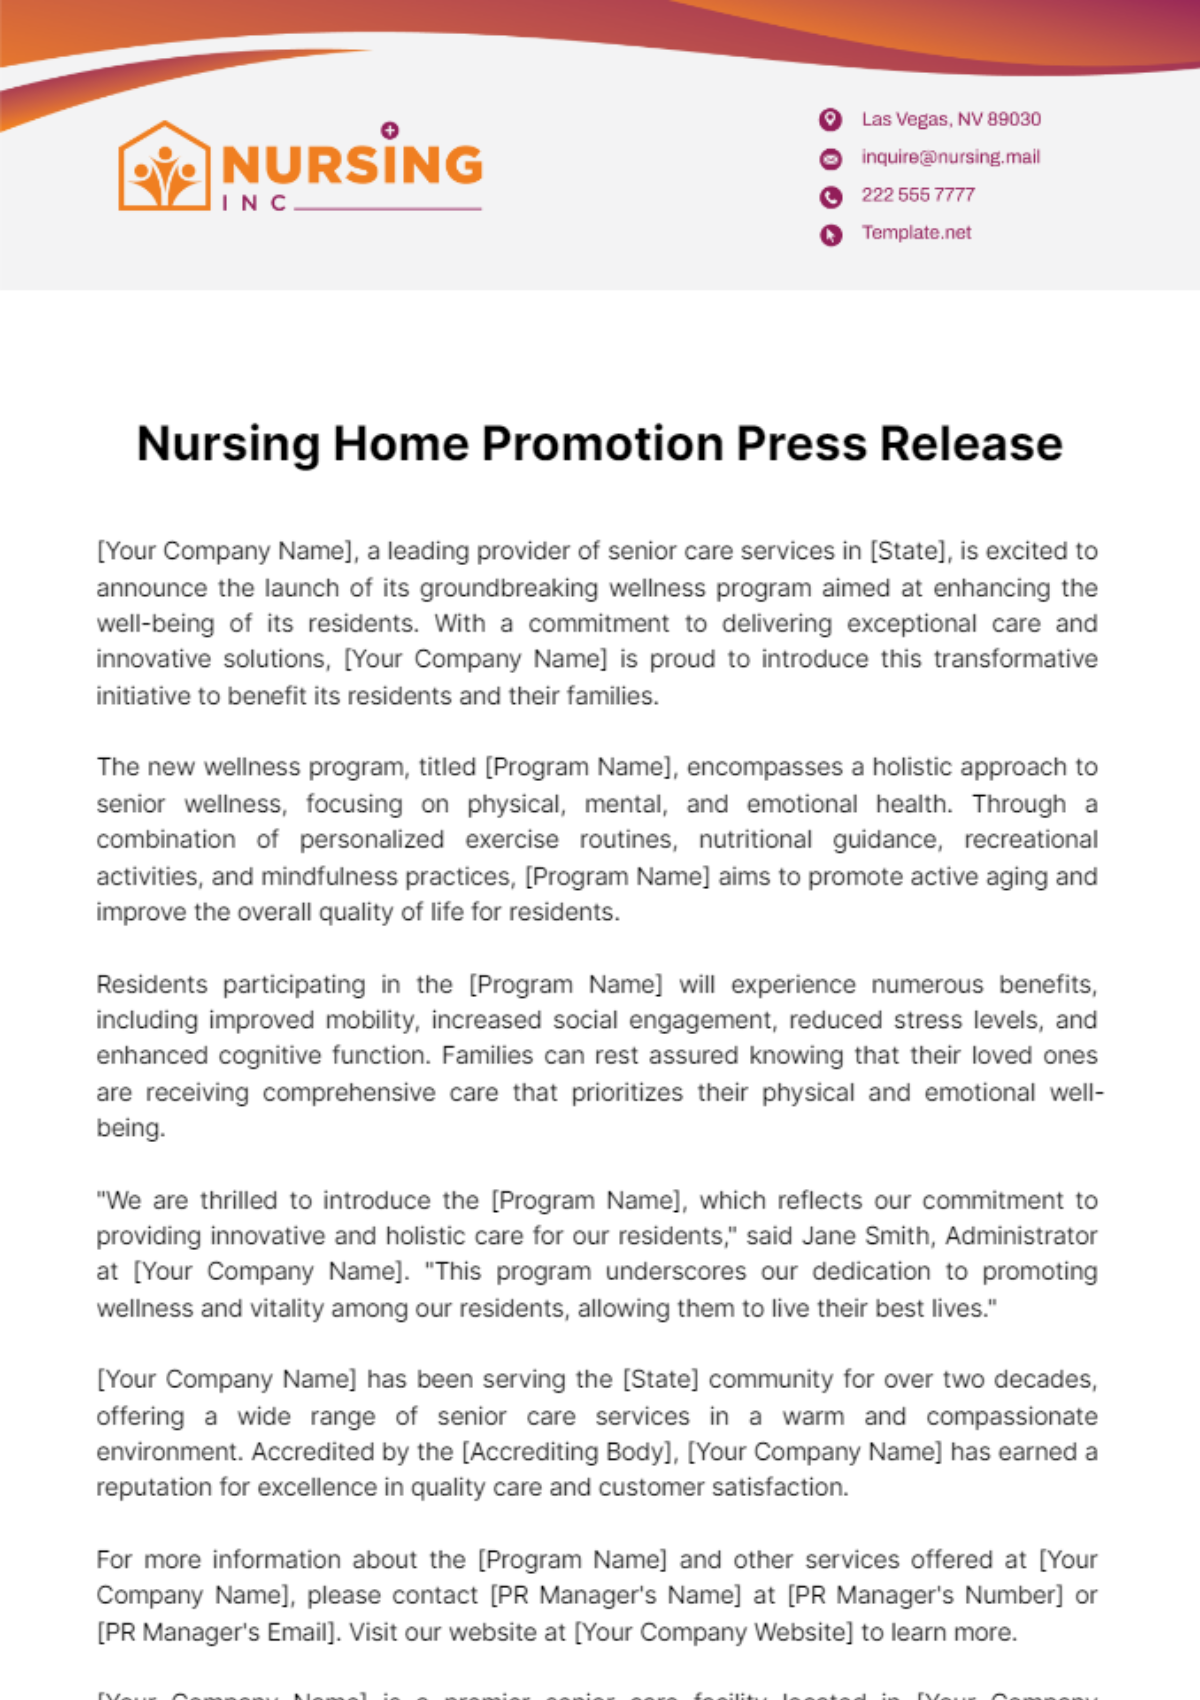 Free Nursing Home Promotion Press Release Template